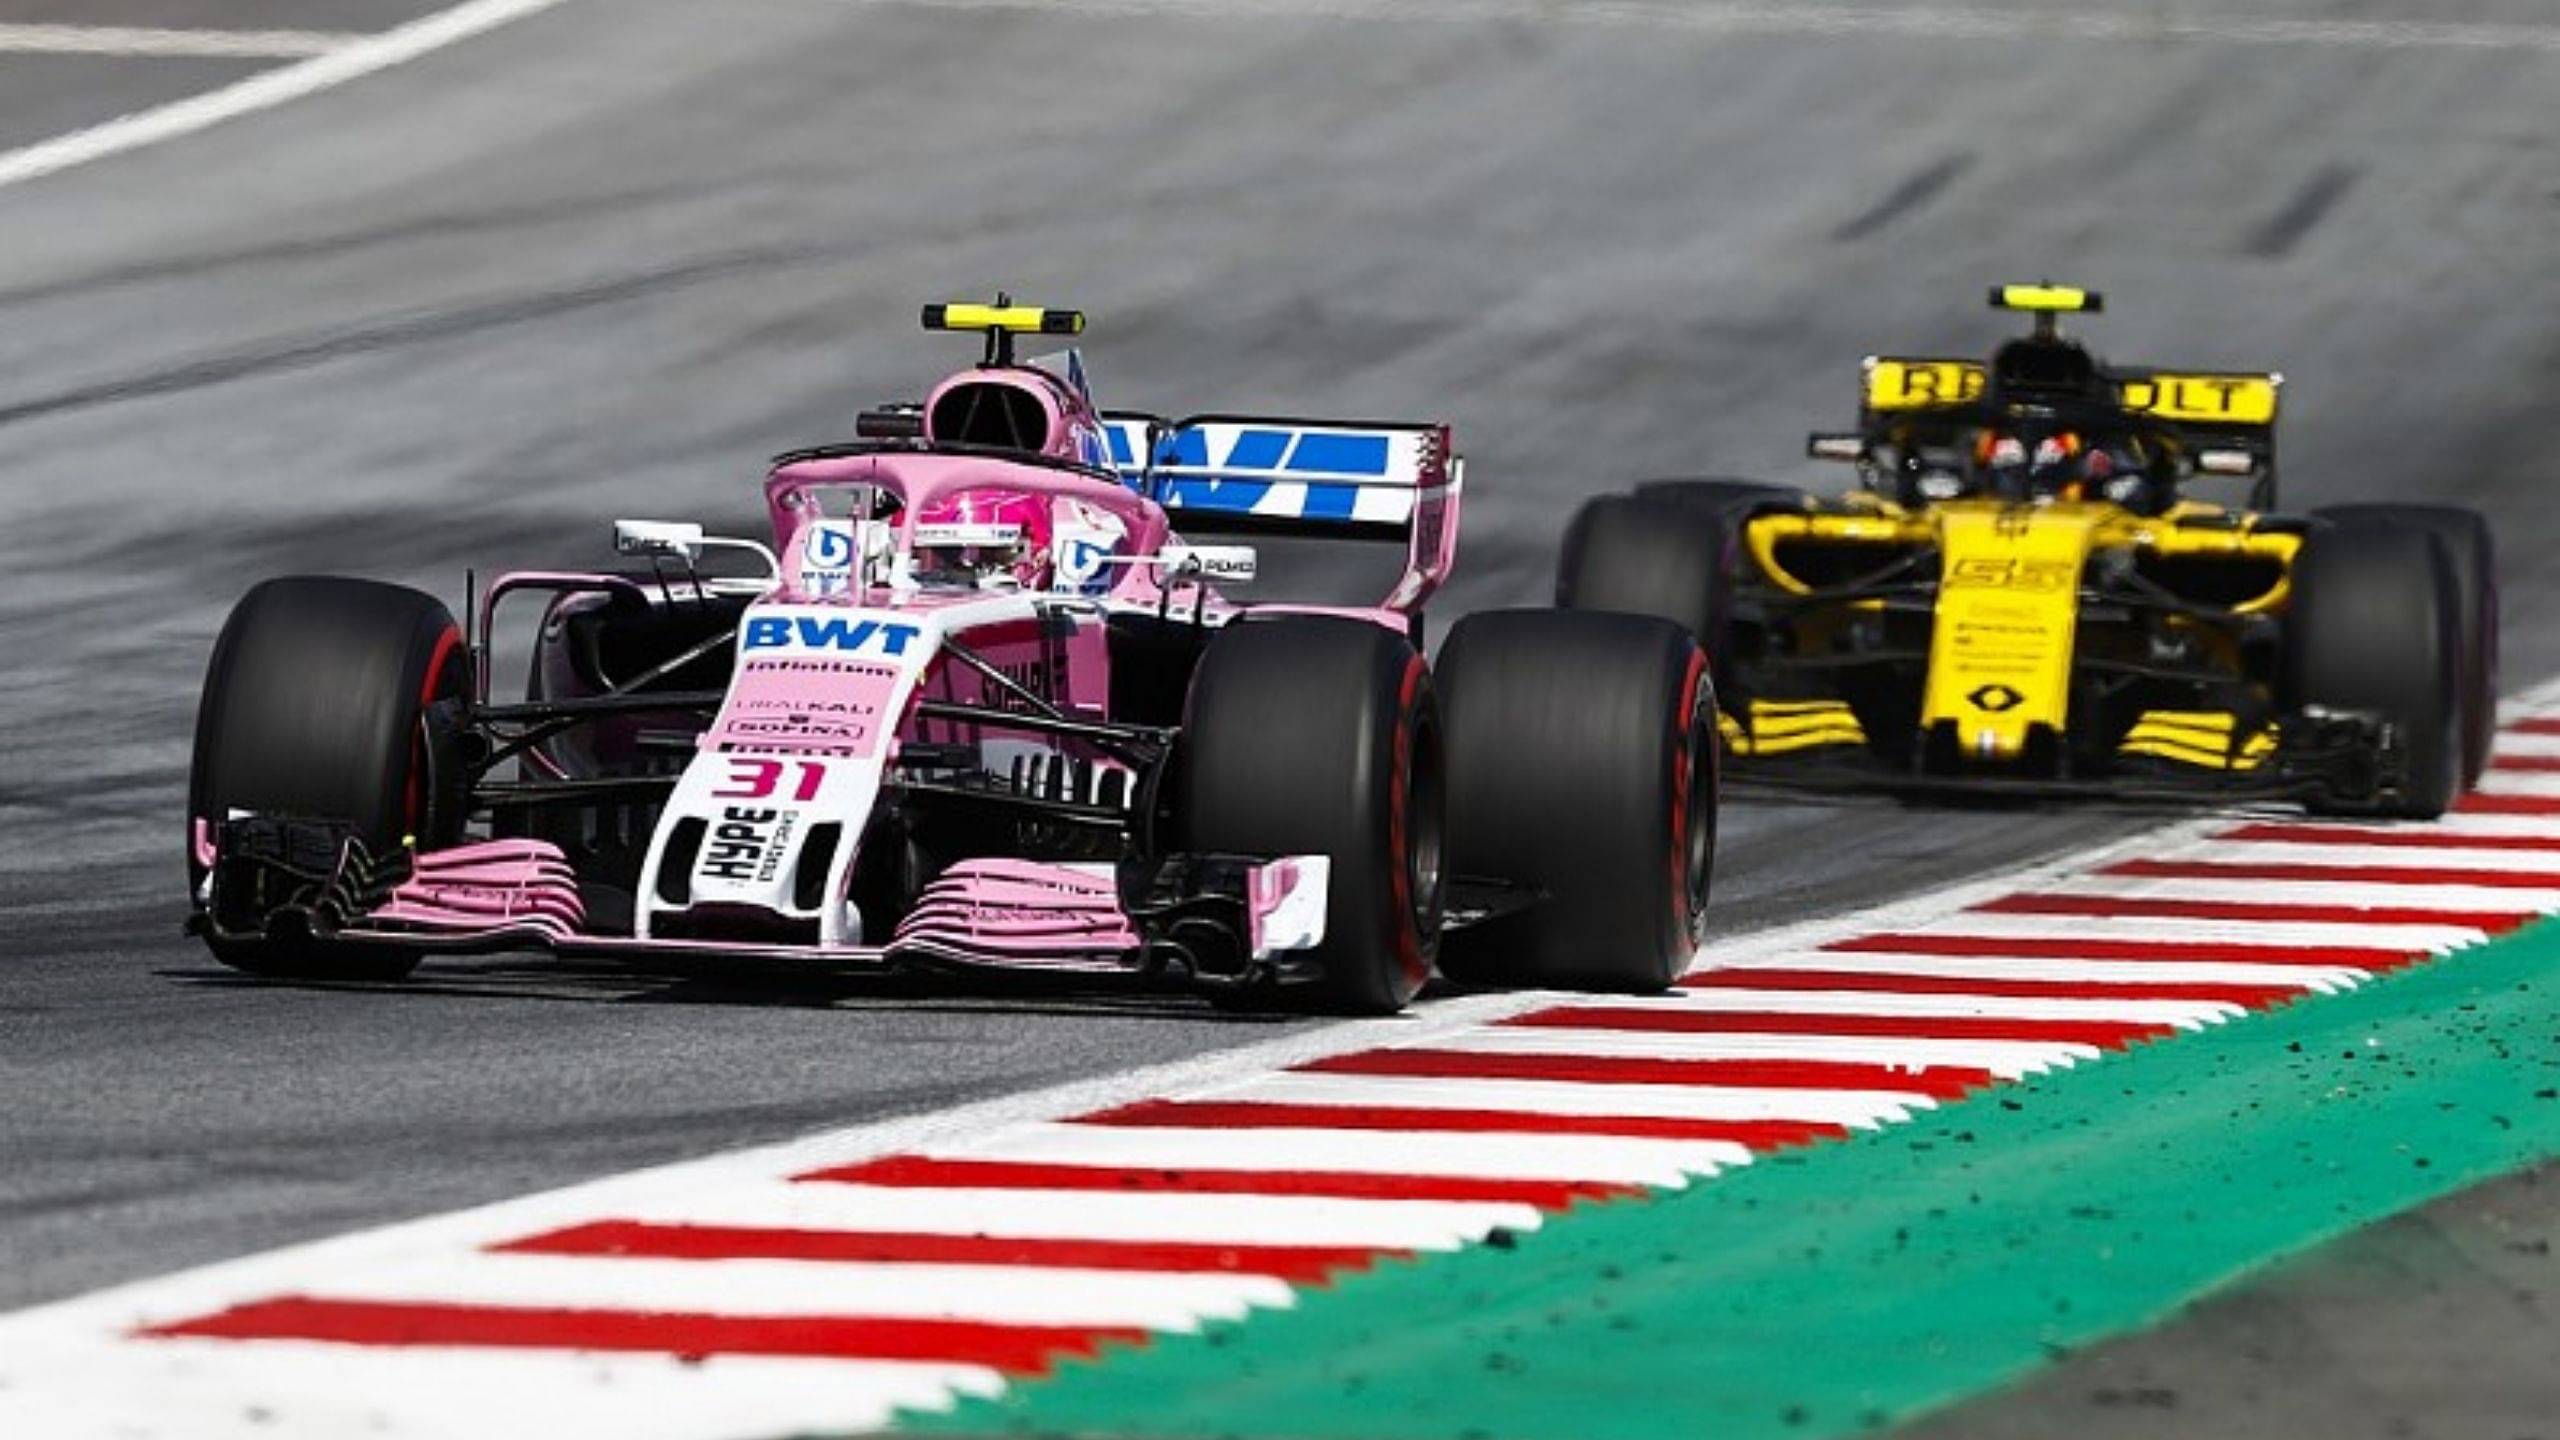 "The car didn’t work like the Mercedes or the Force India" - Esteban Ocon focused on strong Alpine debut after moving on from Renault struggle